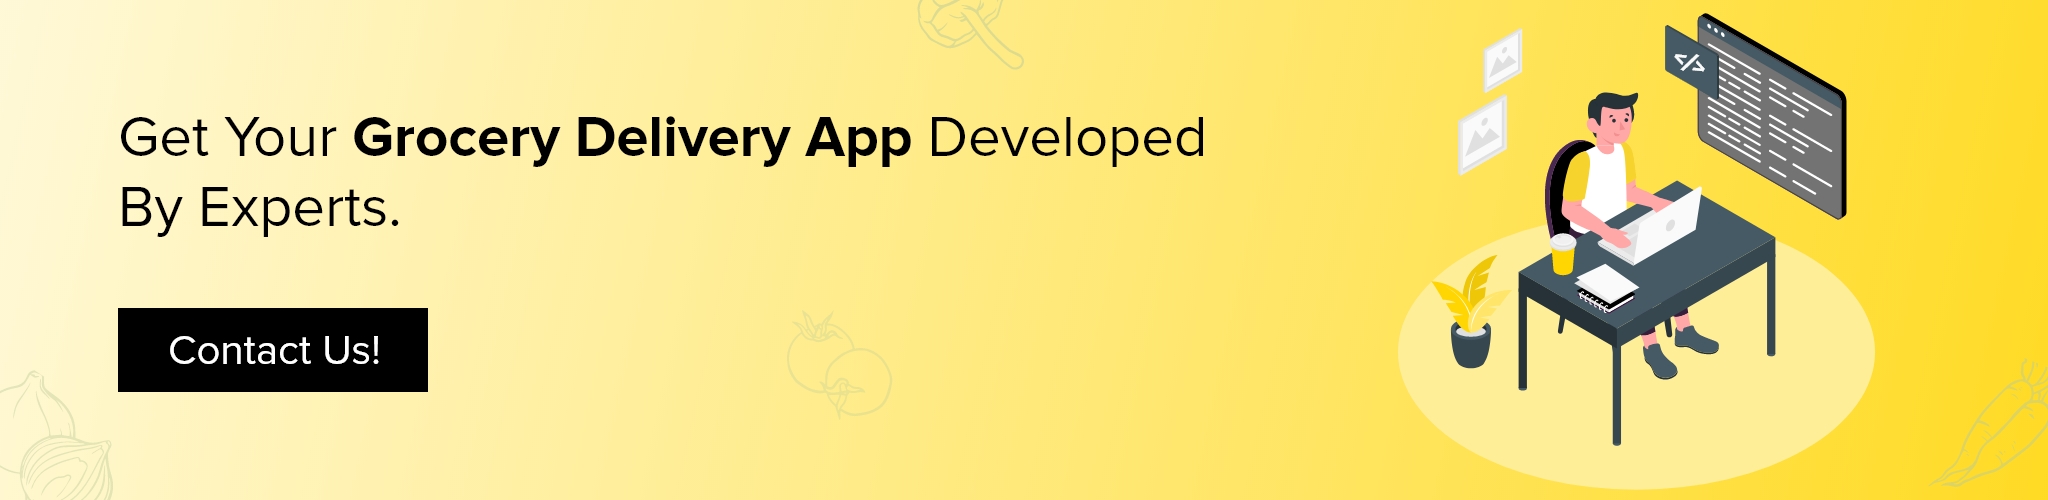 help for on-demand grocery delivery app development